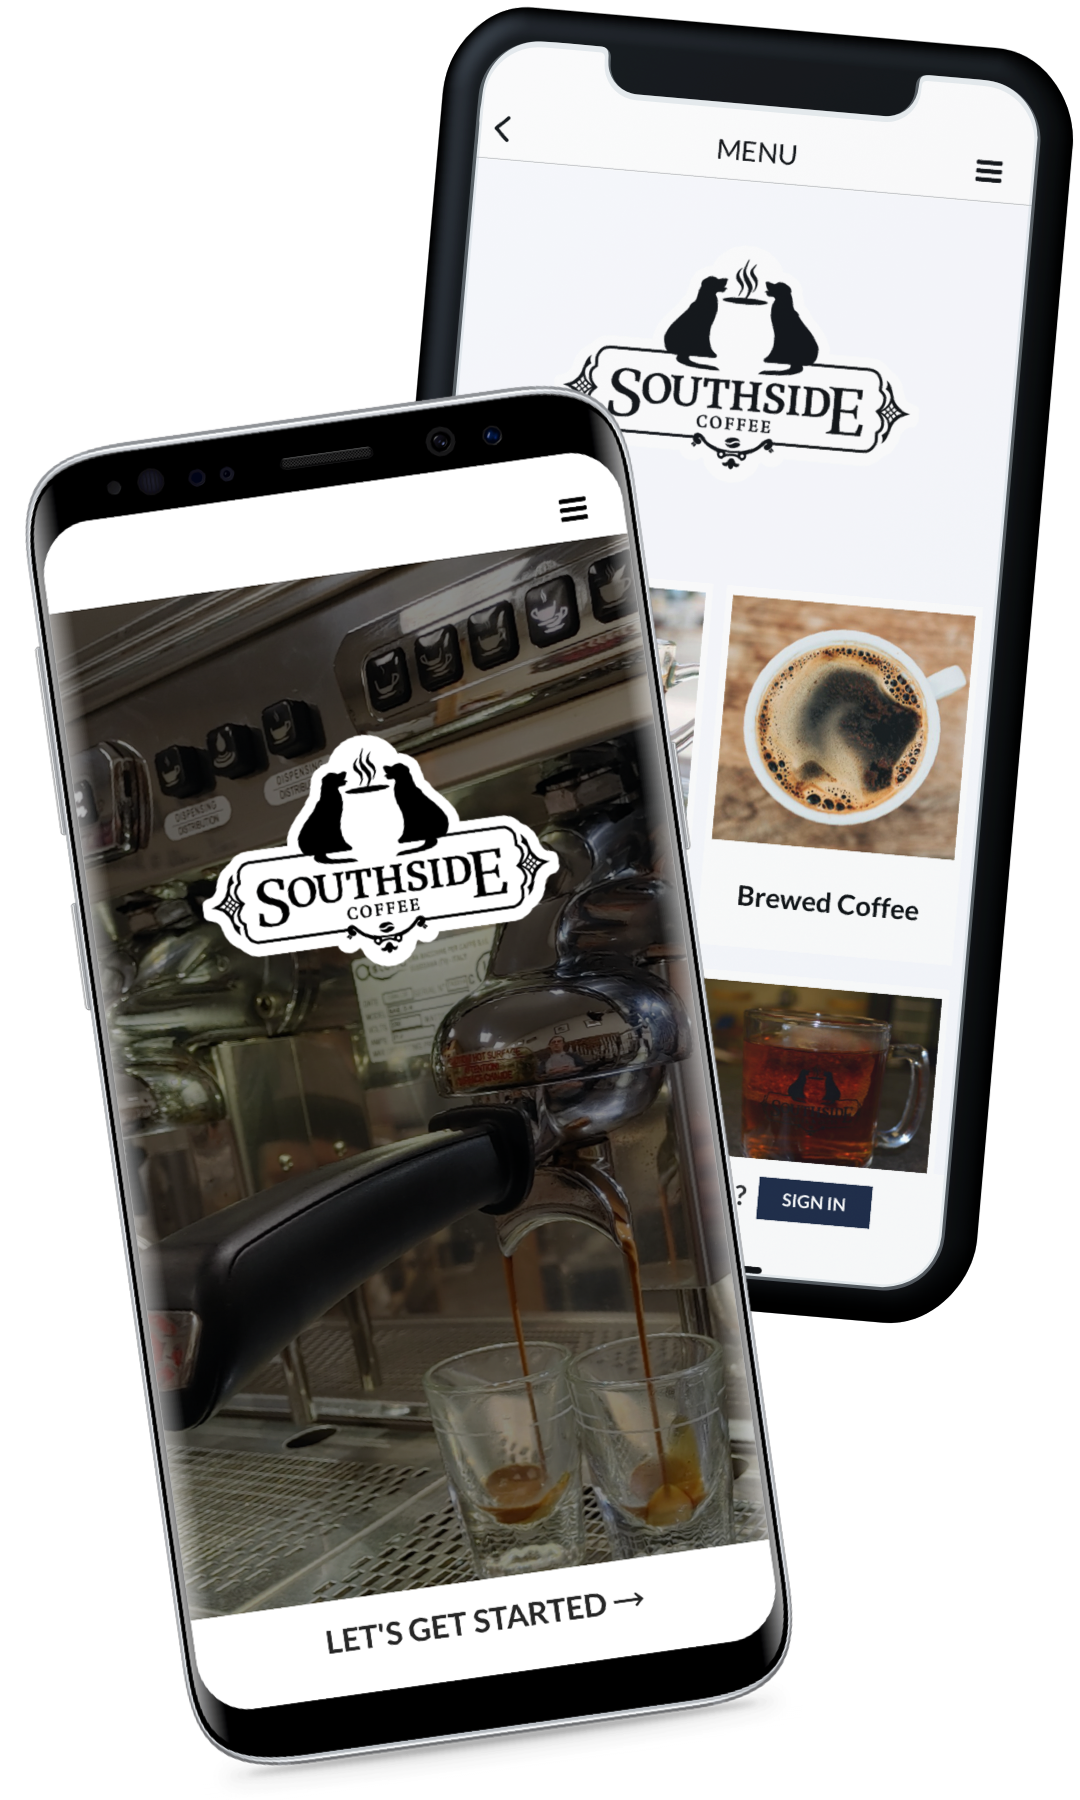 Two iPhones showing the Southside Coffee App splash page and menu page